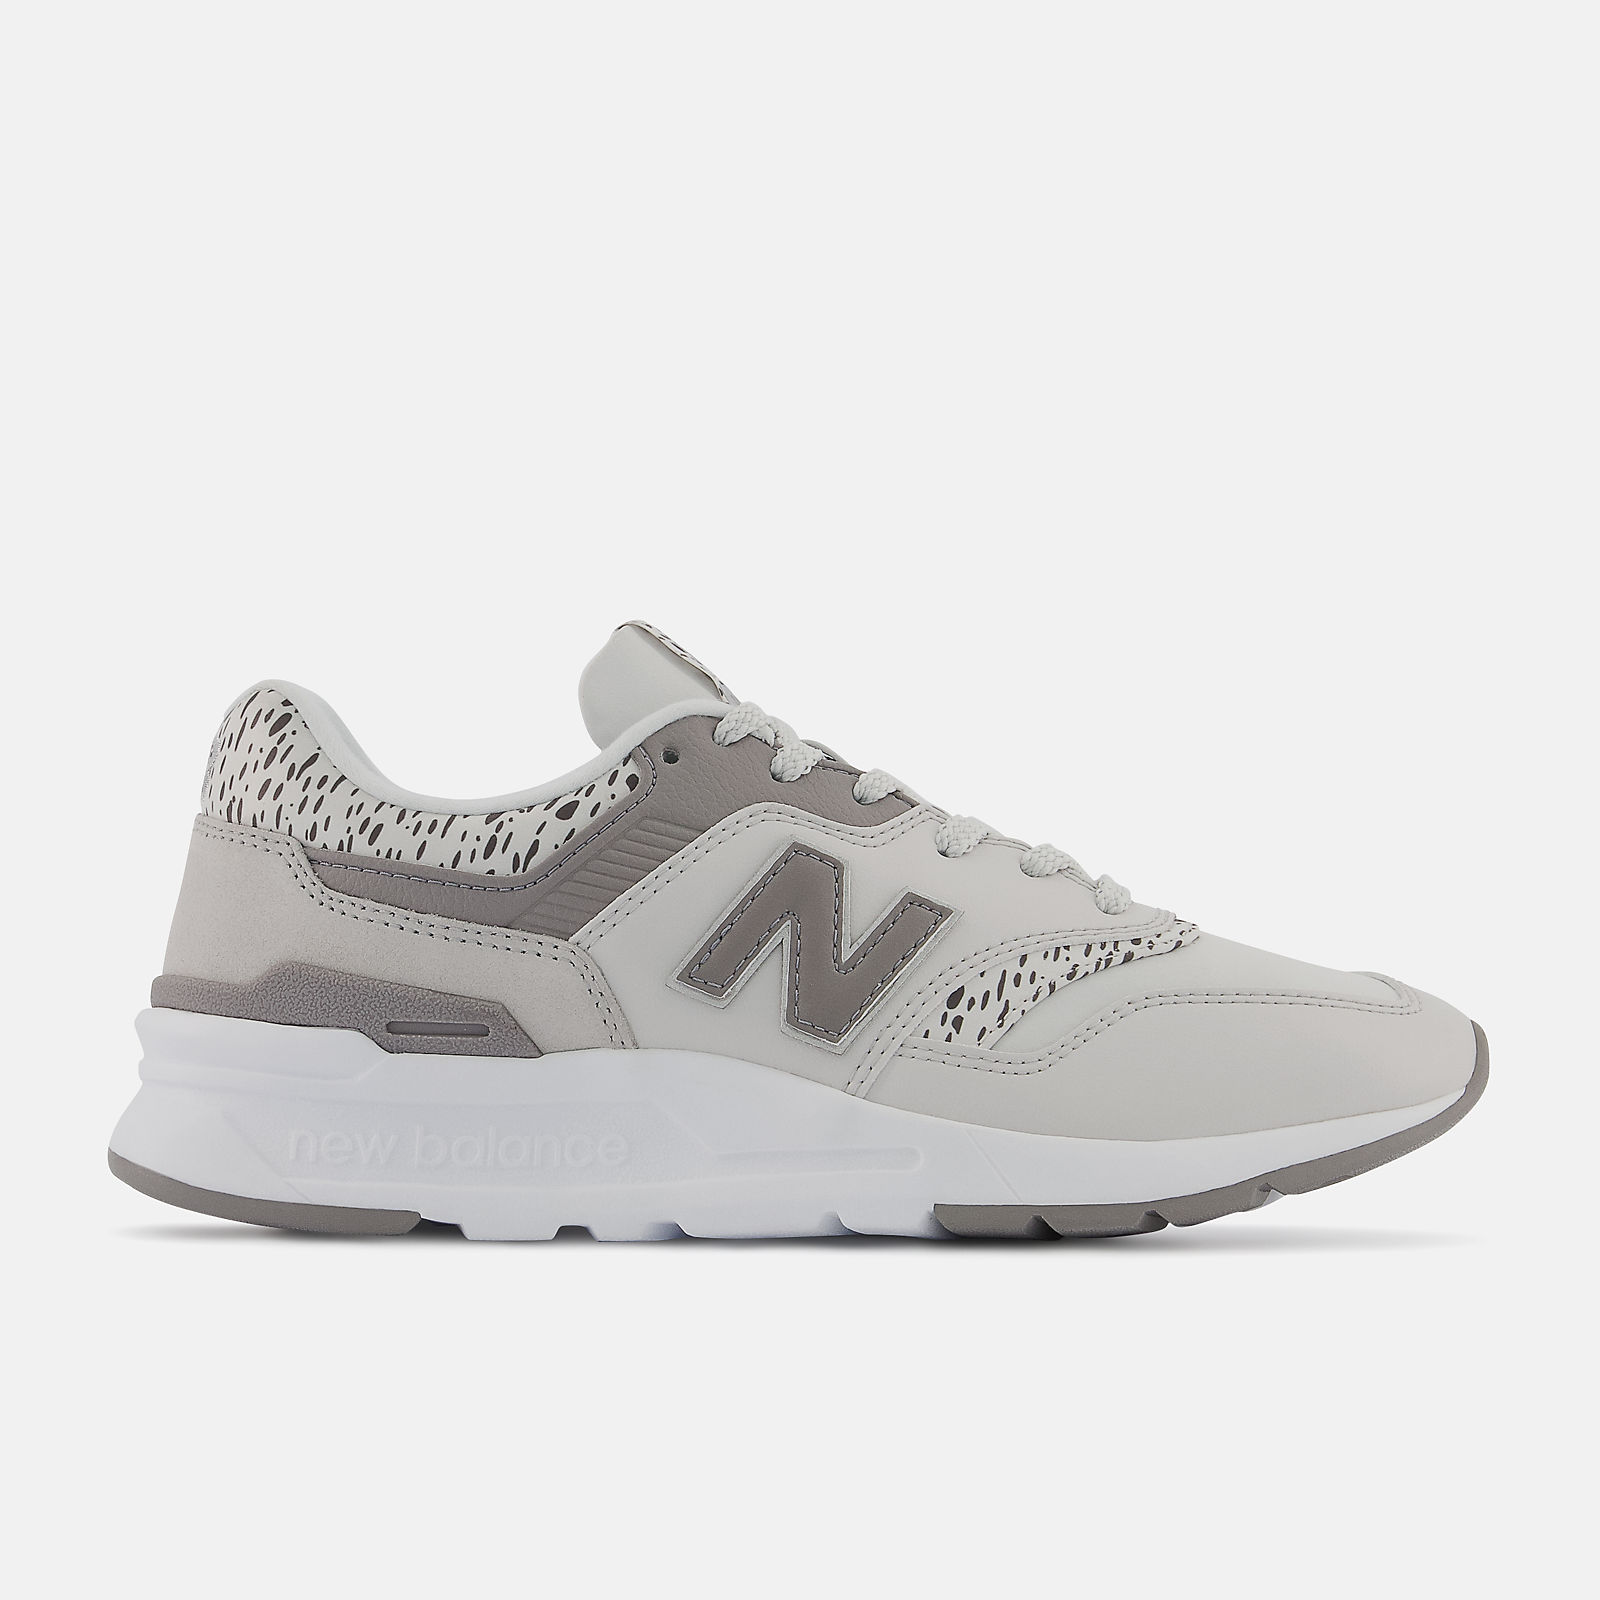 New Balance Leather 997h Low-top Sneakers Save 9% Womens Shoes 